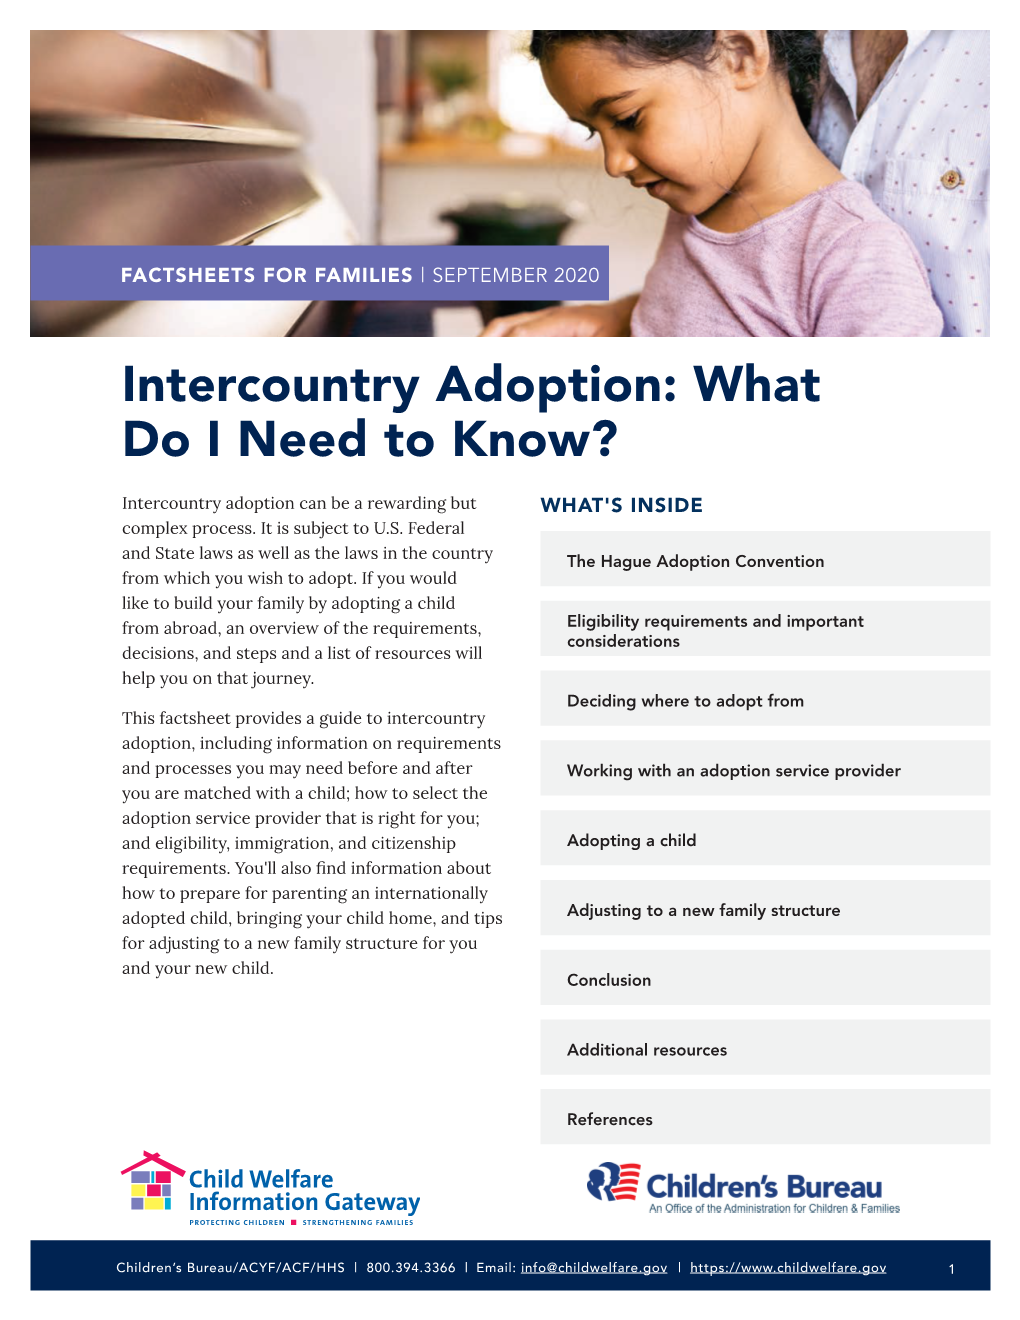 Intercountry Adoption: What Do I Need to Know?